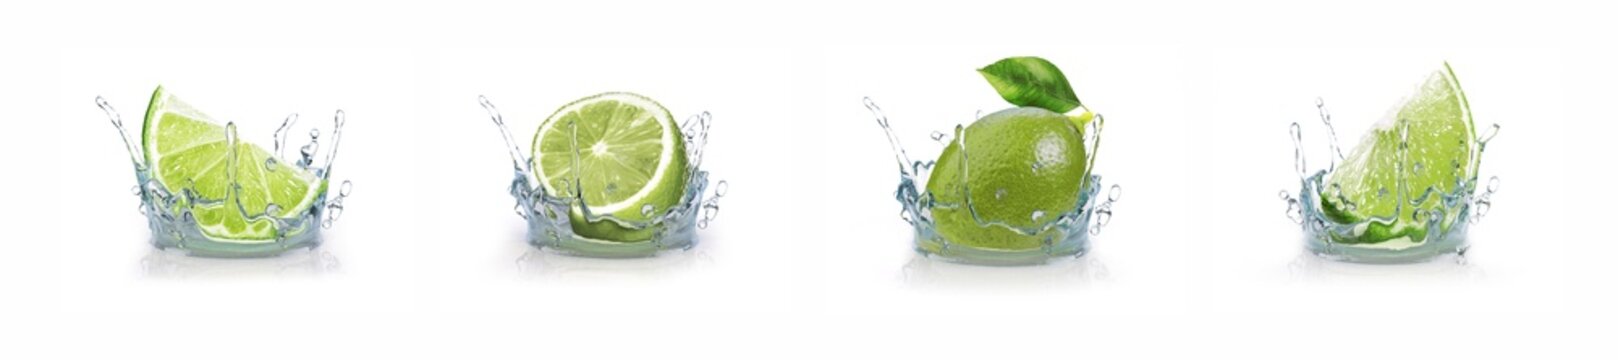 lime and water splash. isolated on white, 3d rendering